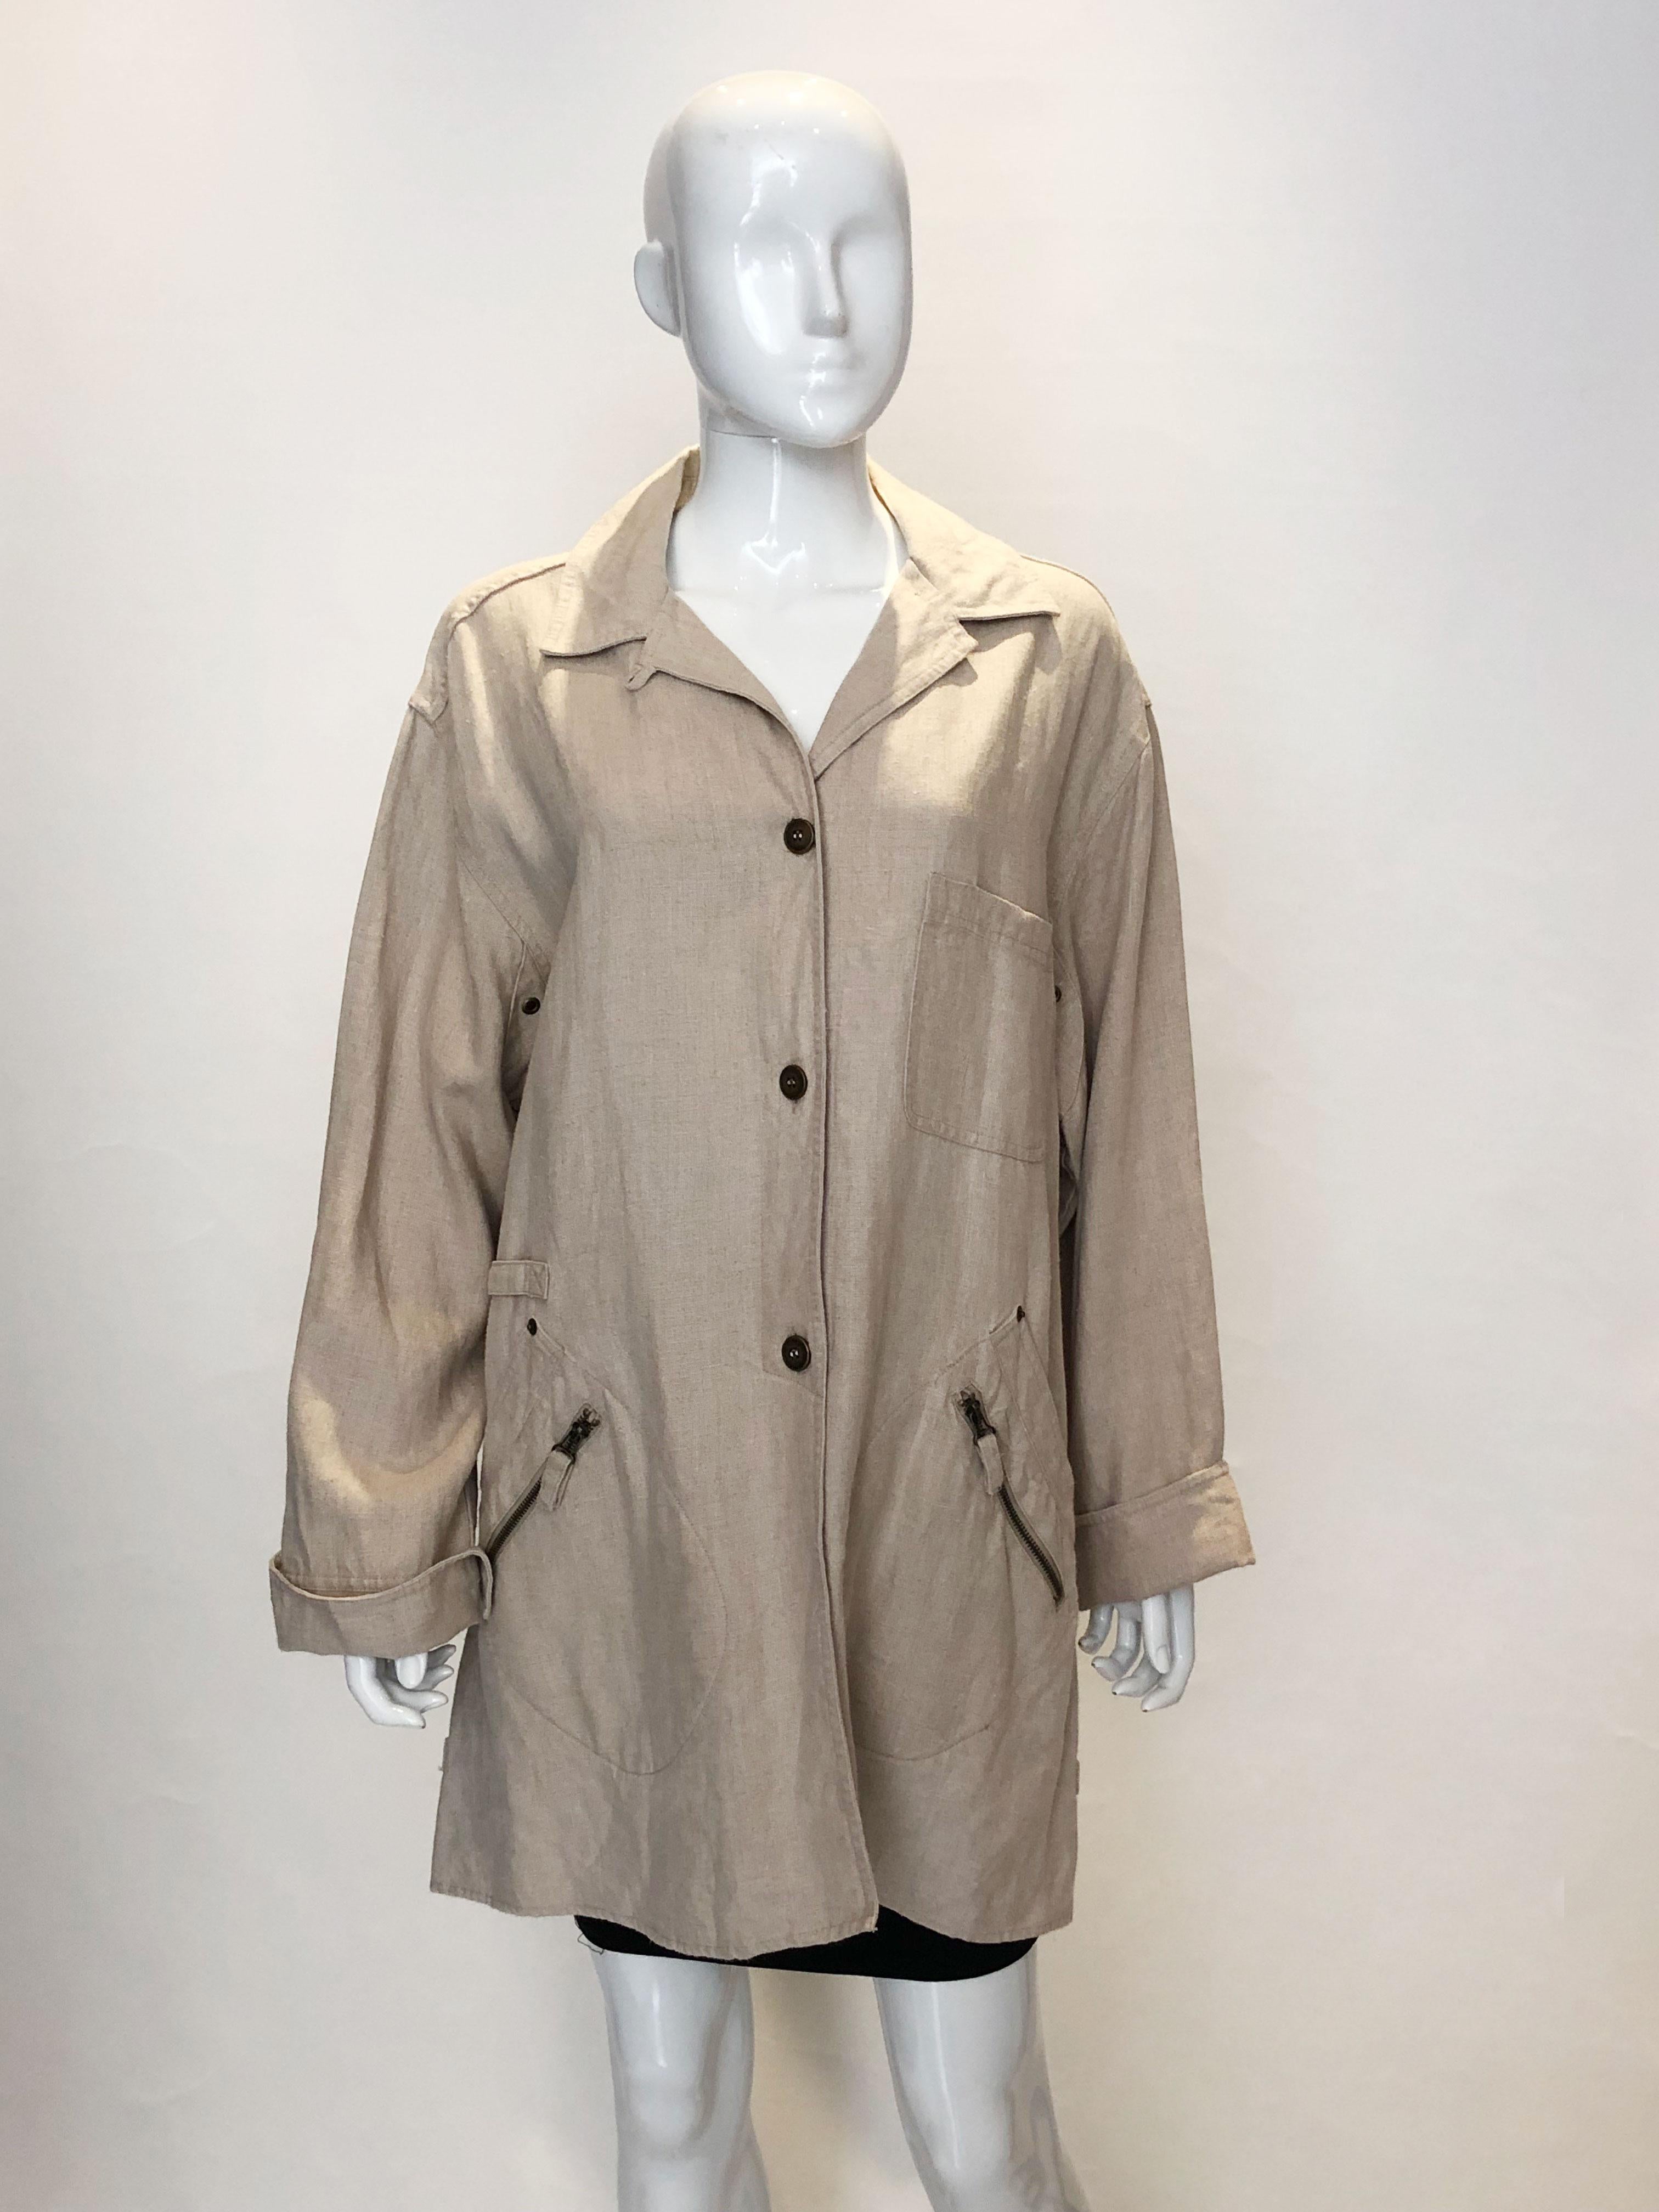 A great linen jacket by Emanuel Ungaro. The jacket is in  a heavy linen fabric with two zip pockets on the front. It should be worn loose and can fit bust up to 47'.